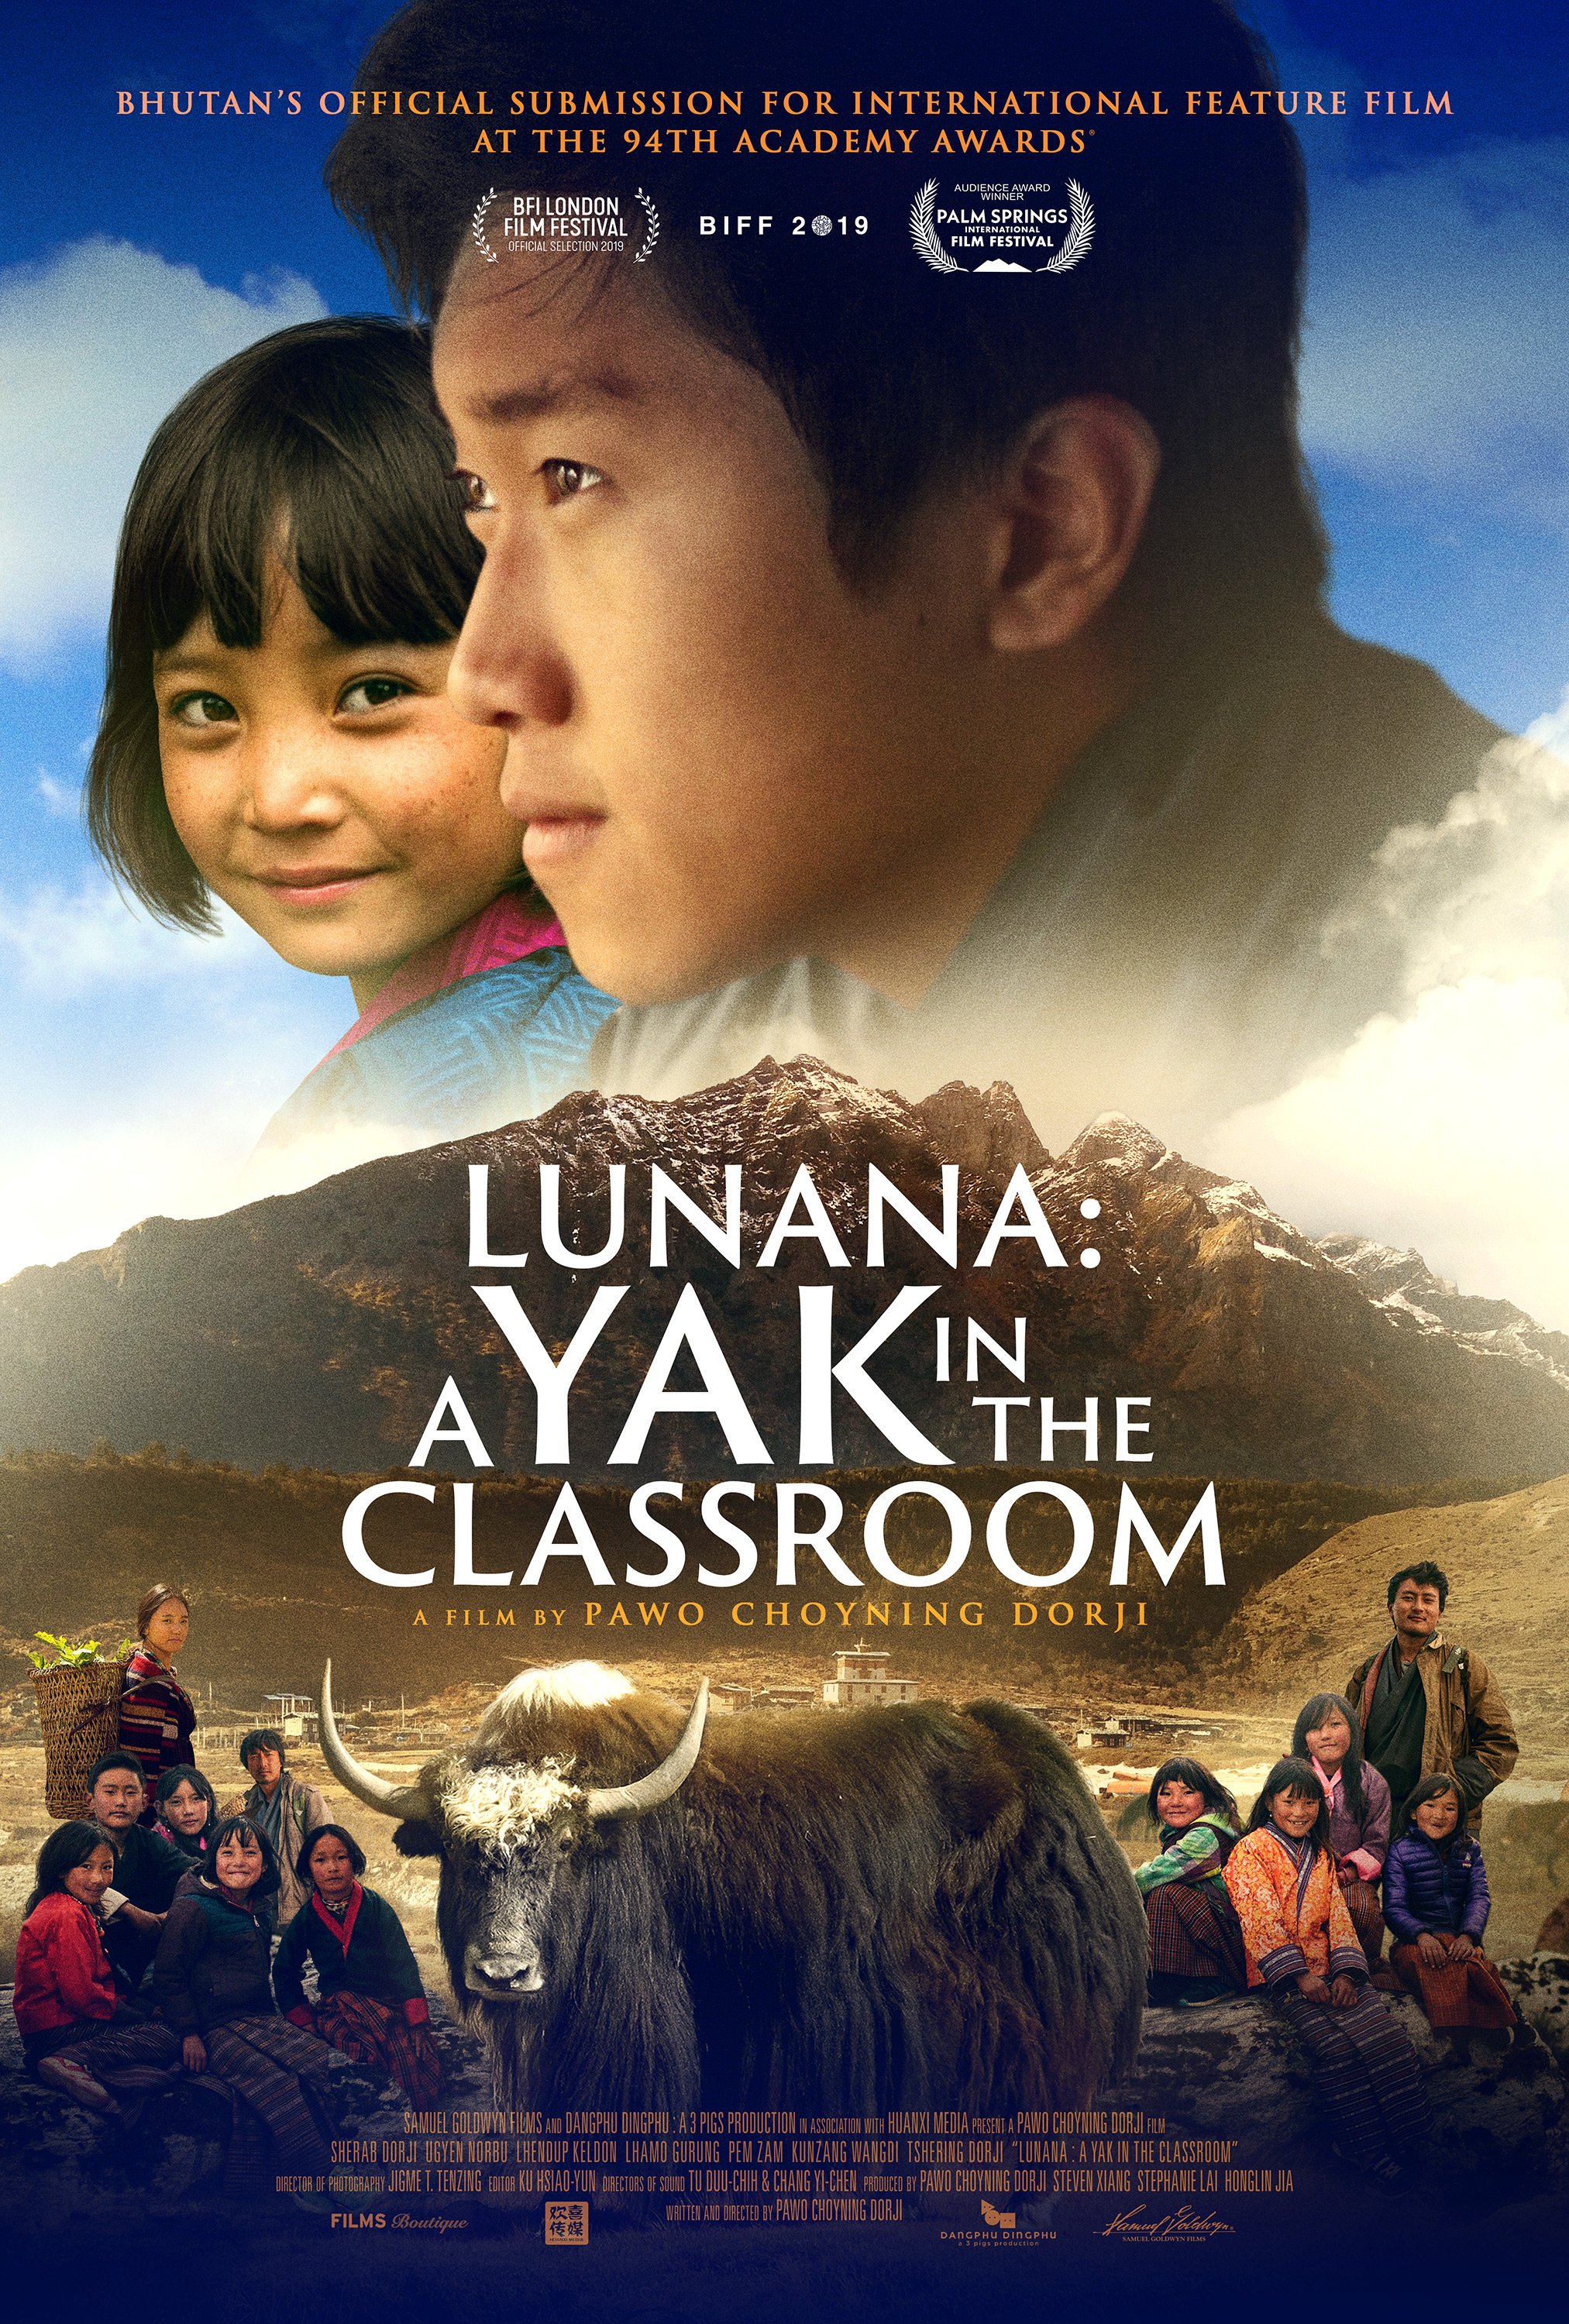 Image of the movie cover for Lunana: A Yak in the Classroom featuring a large yak standing in the midst of a village gathering. 